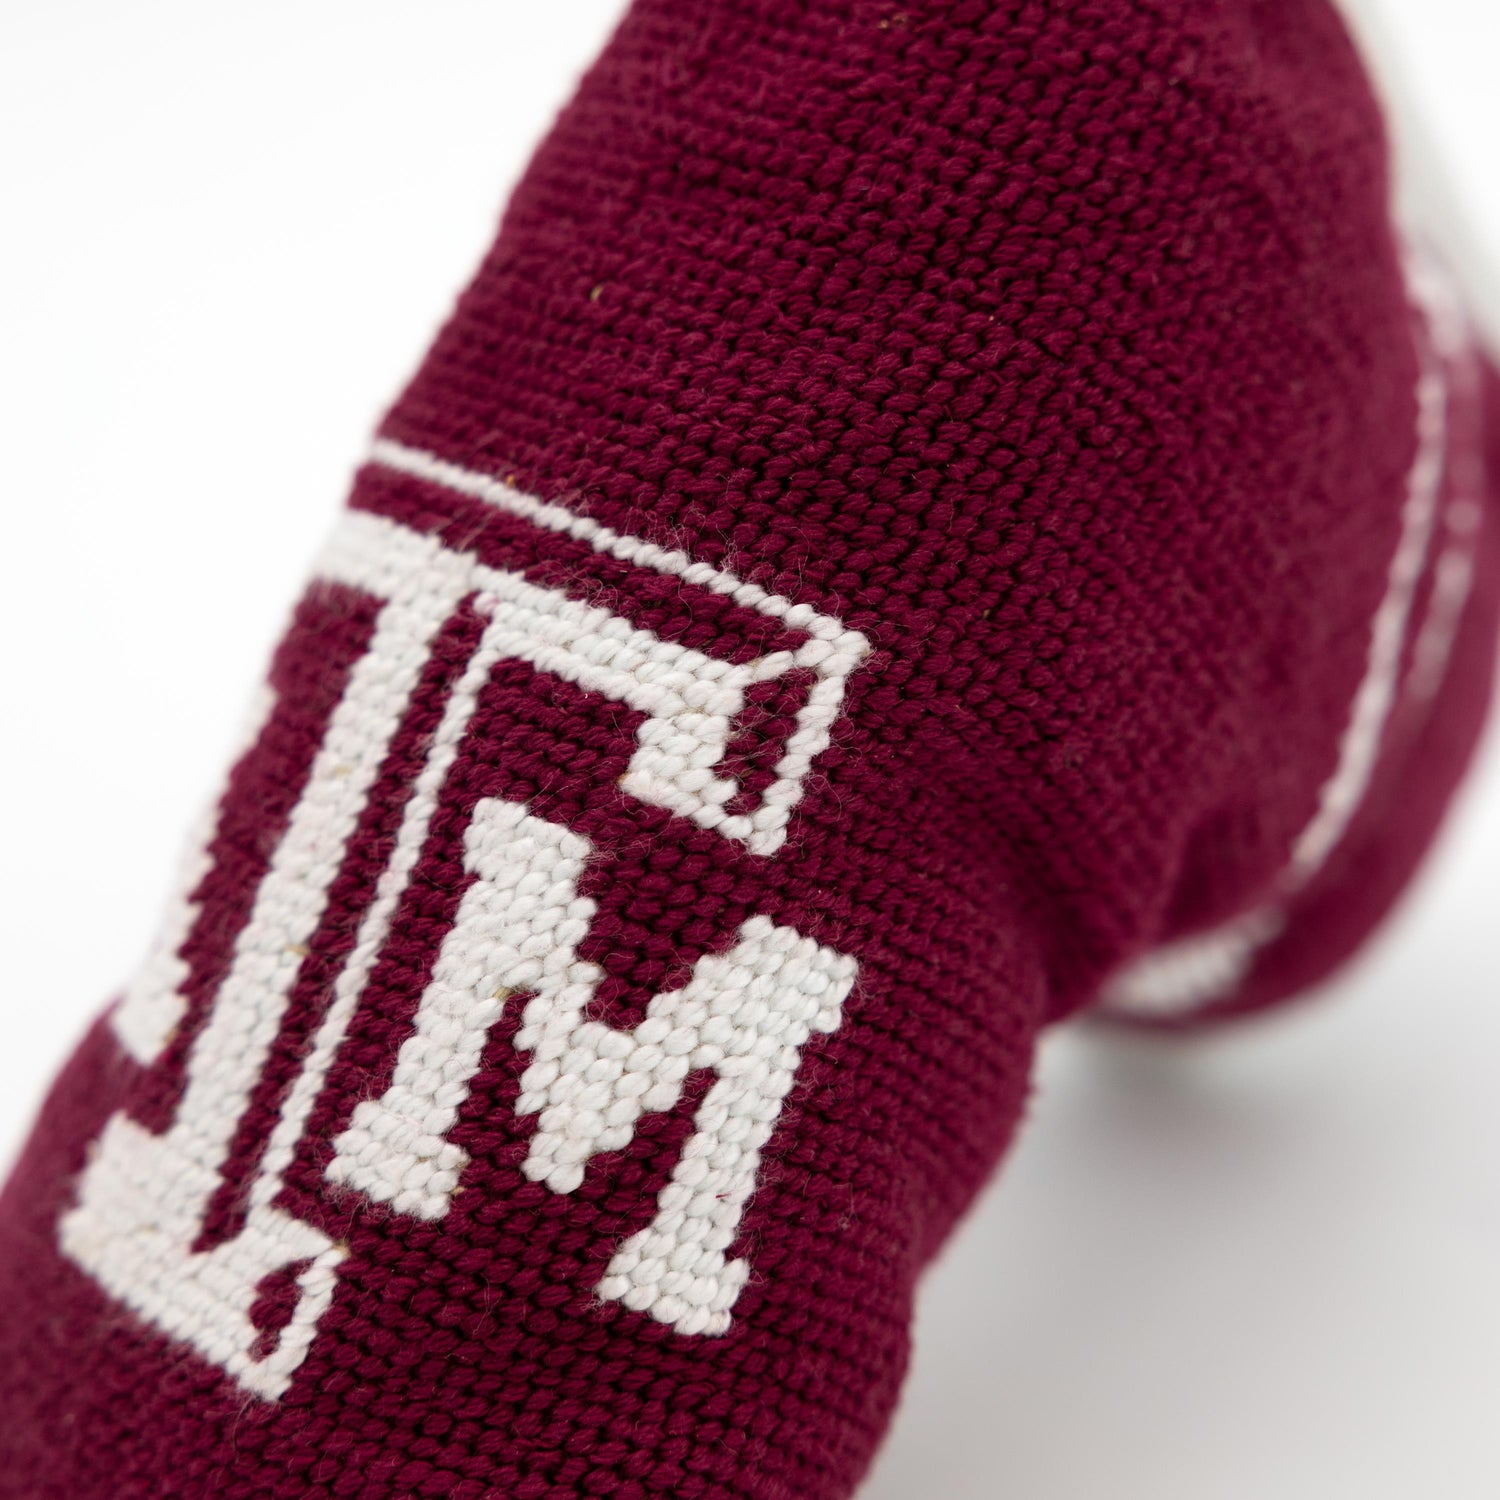 Texas A&M Smathers & Branson Maroon Putter Head Cover